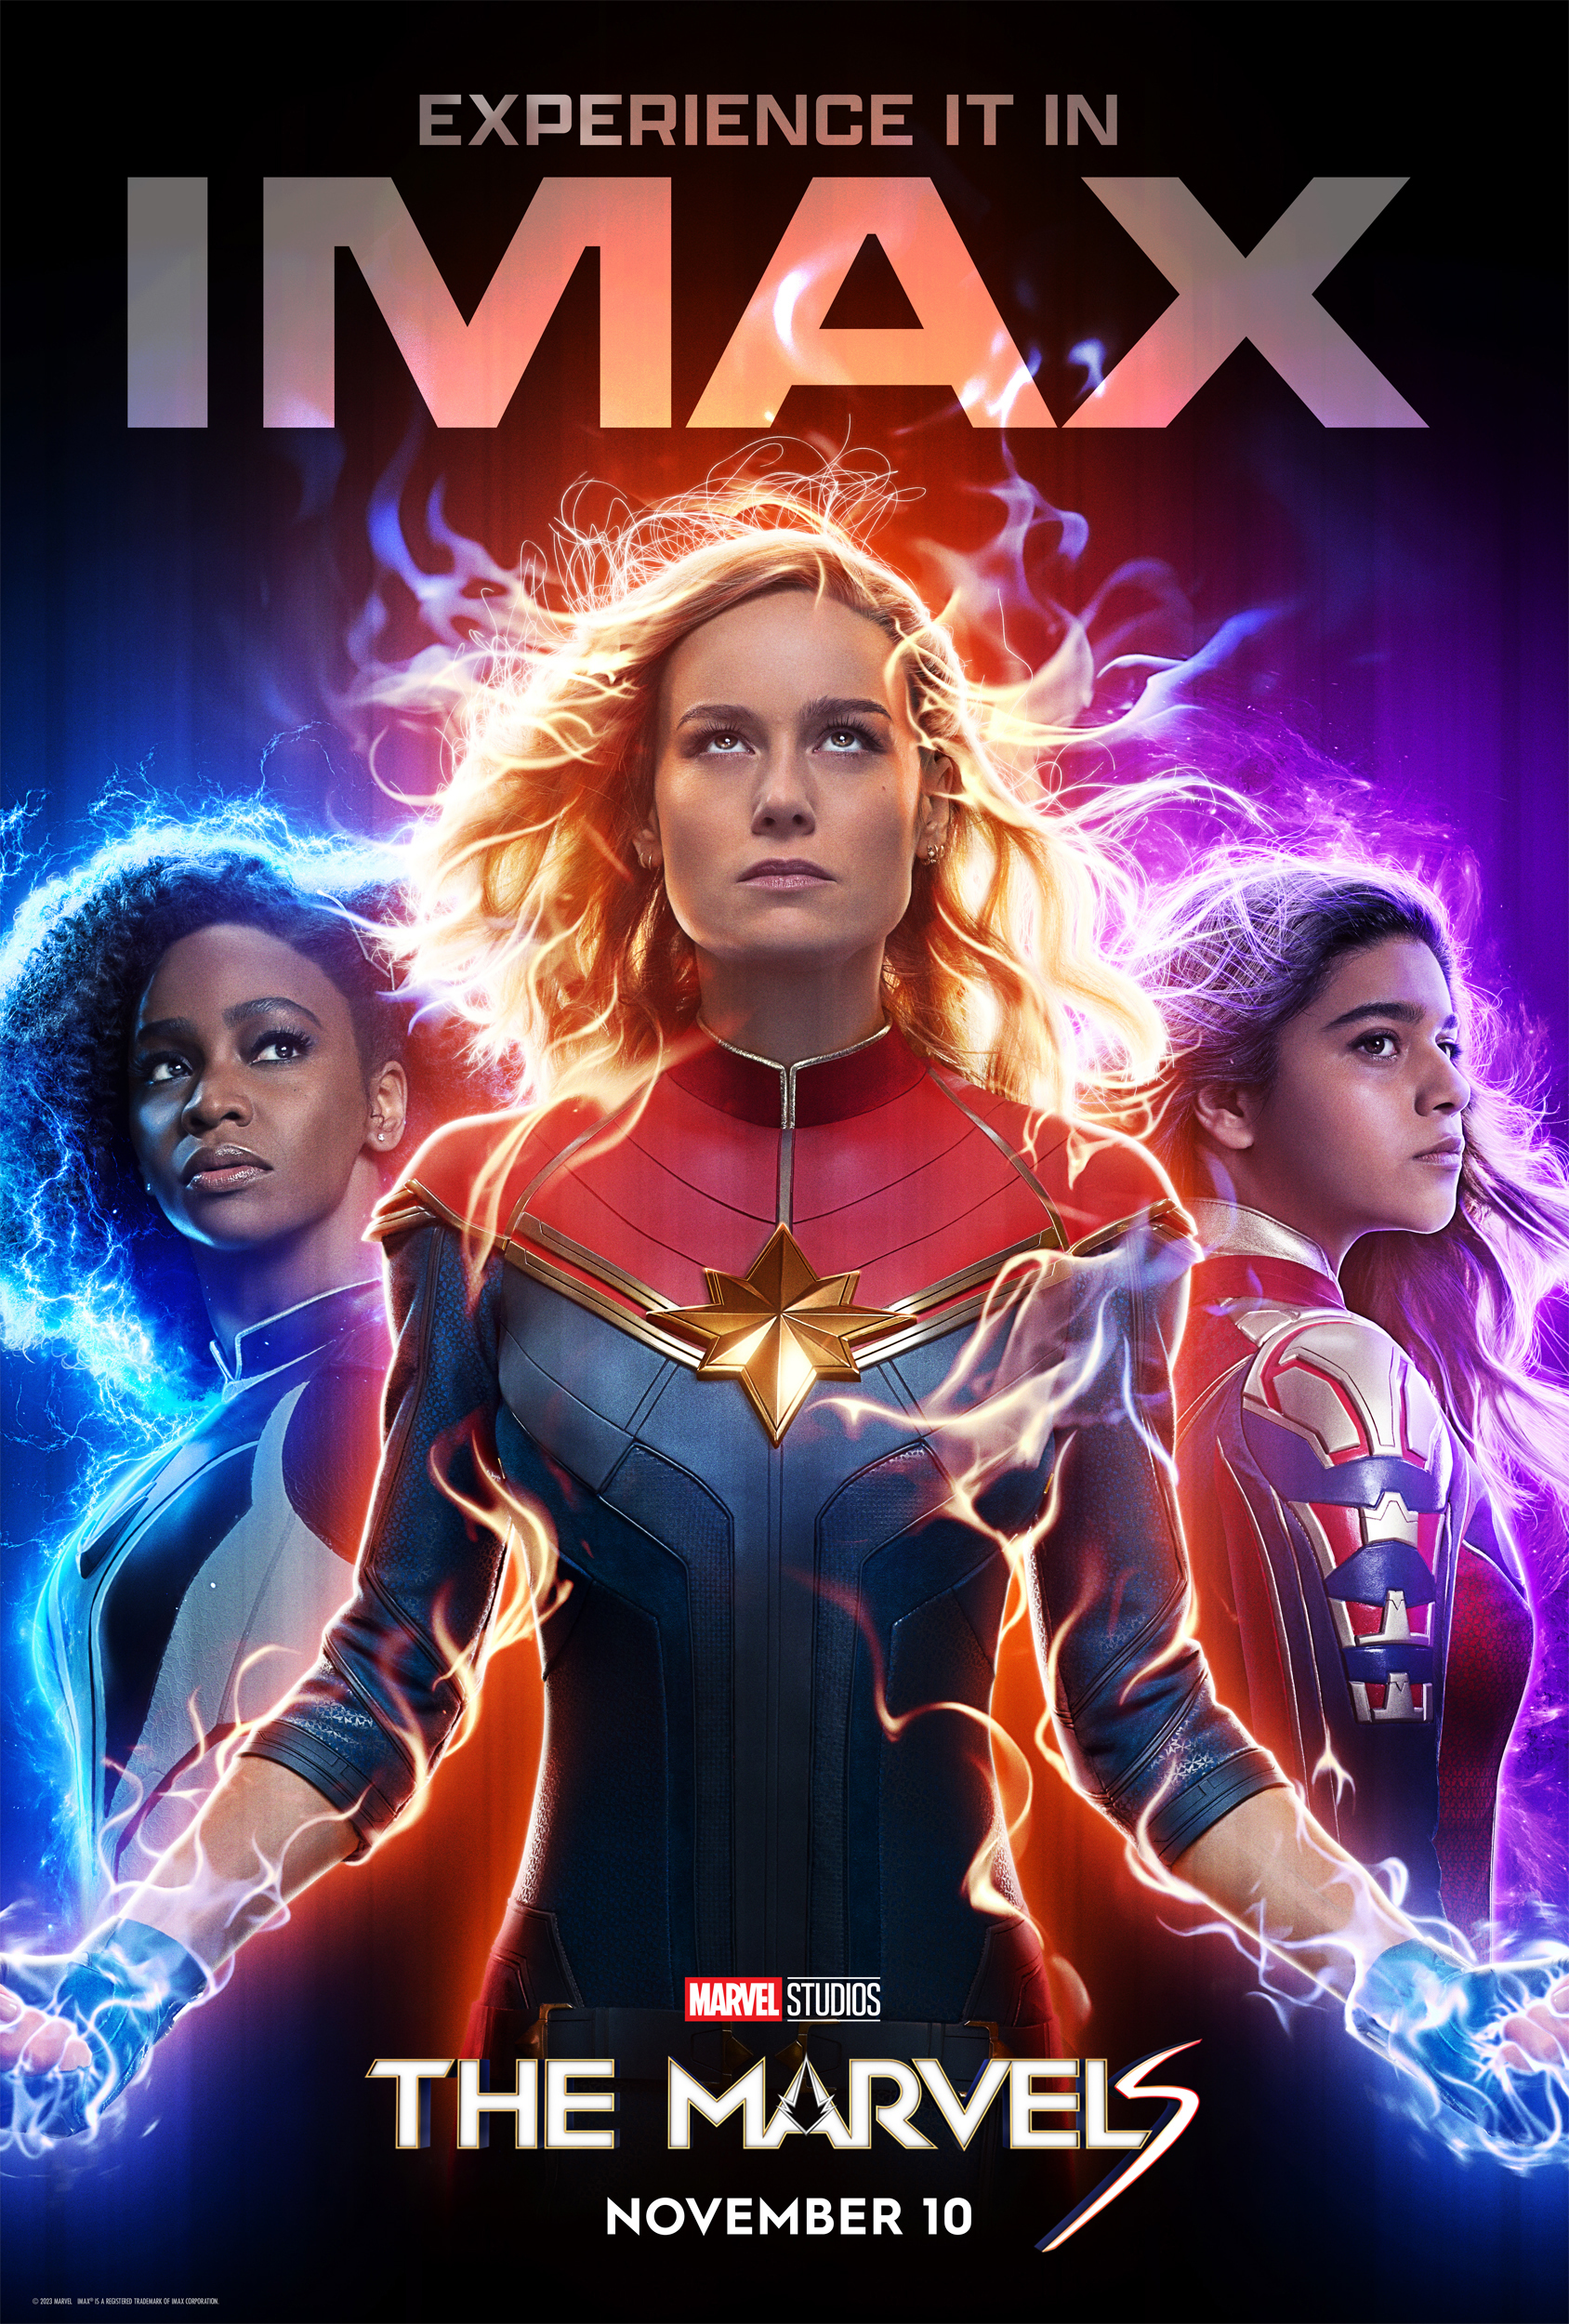 The Marvels IMAX movie poster featuring Carol Danvers for phone wallpaper.